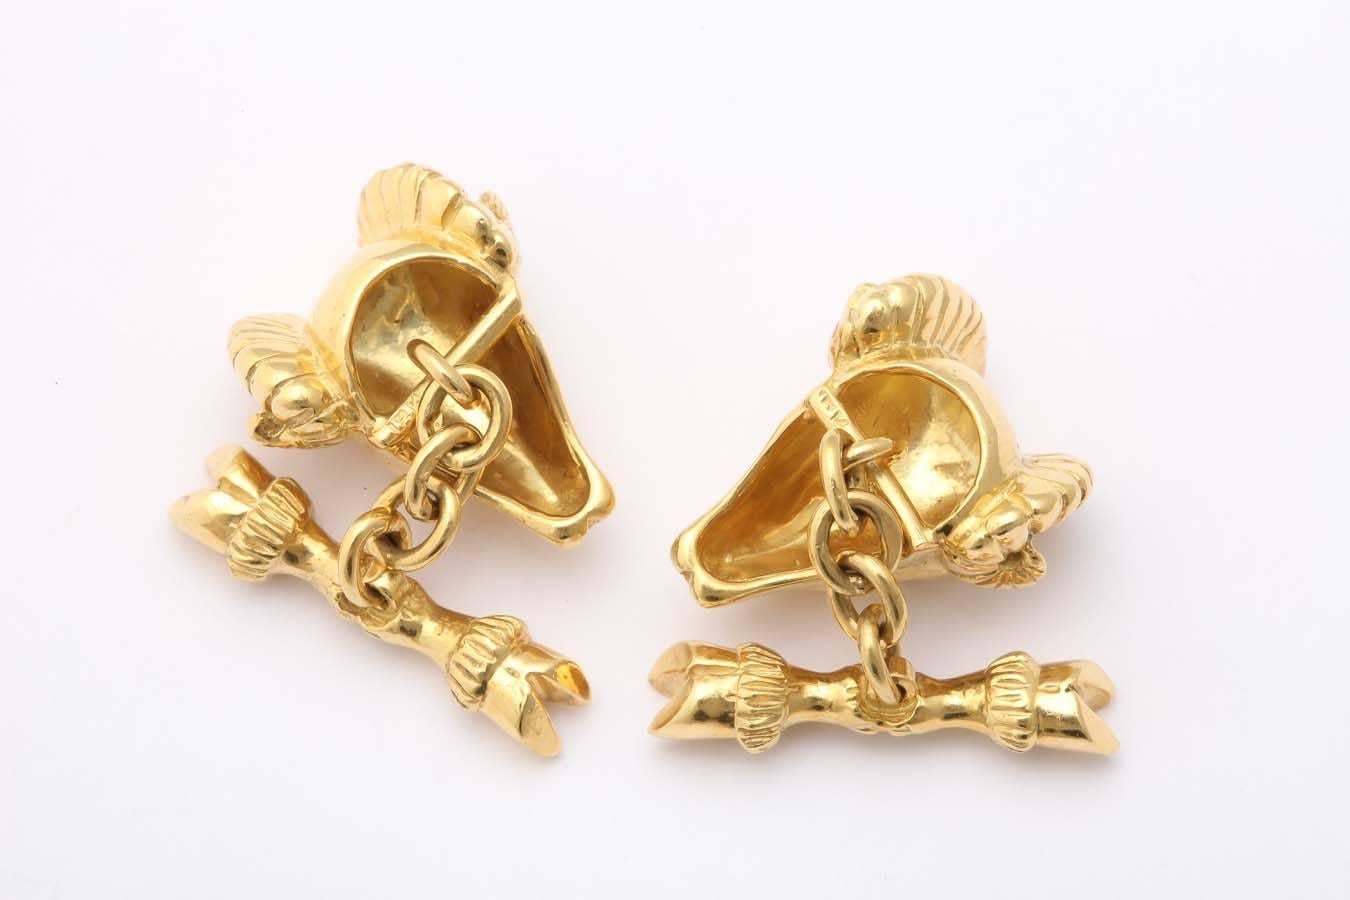 Pair of 18K Gold Ram's head cufflinks, 1970s In Excellent Condition For Sale In New York, NY